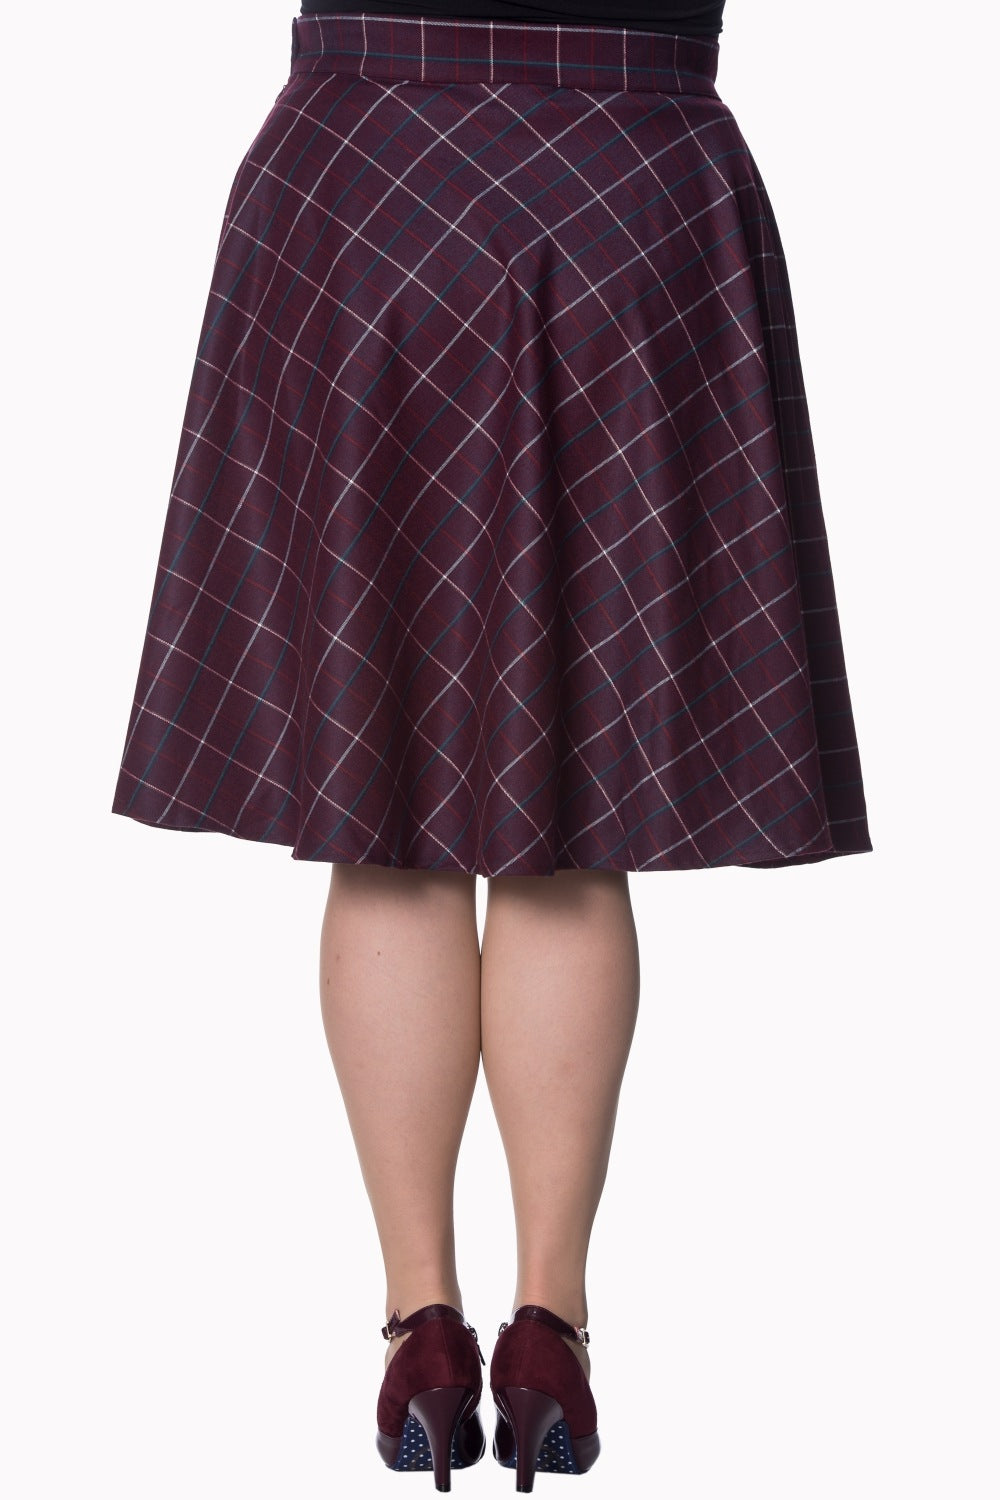 Back of the Maddy plum coloured swing skirt being worn by a model 